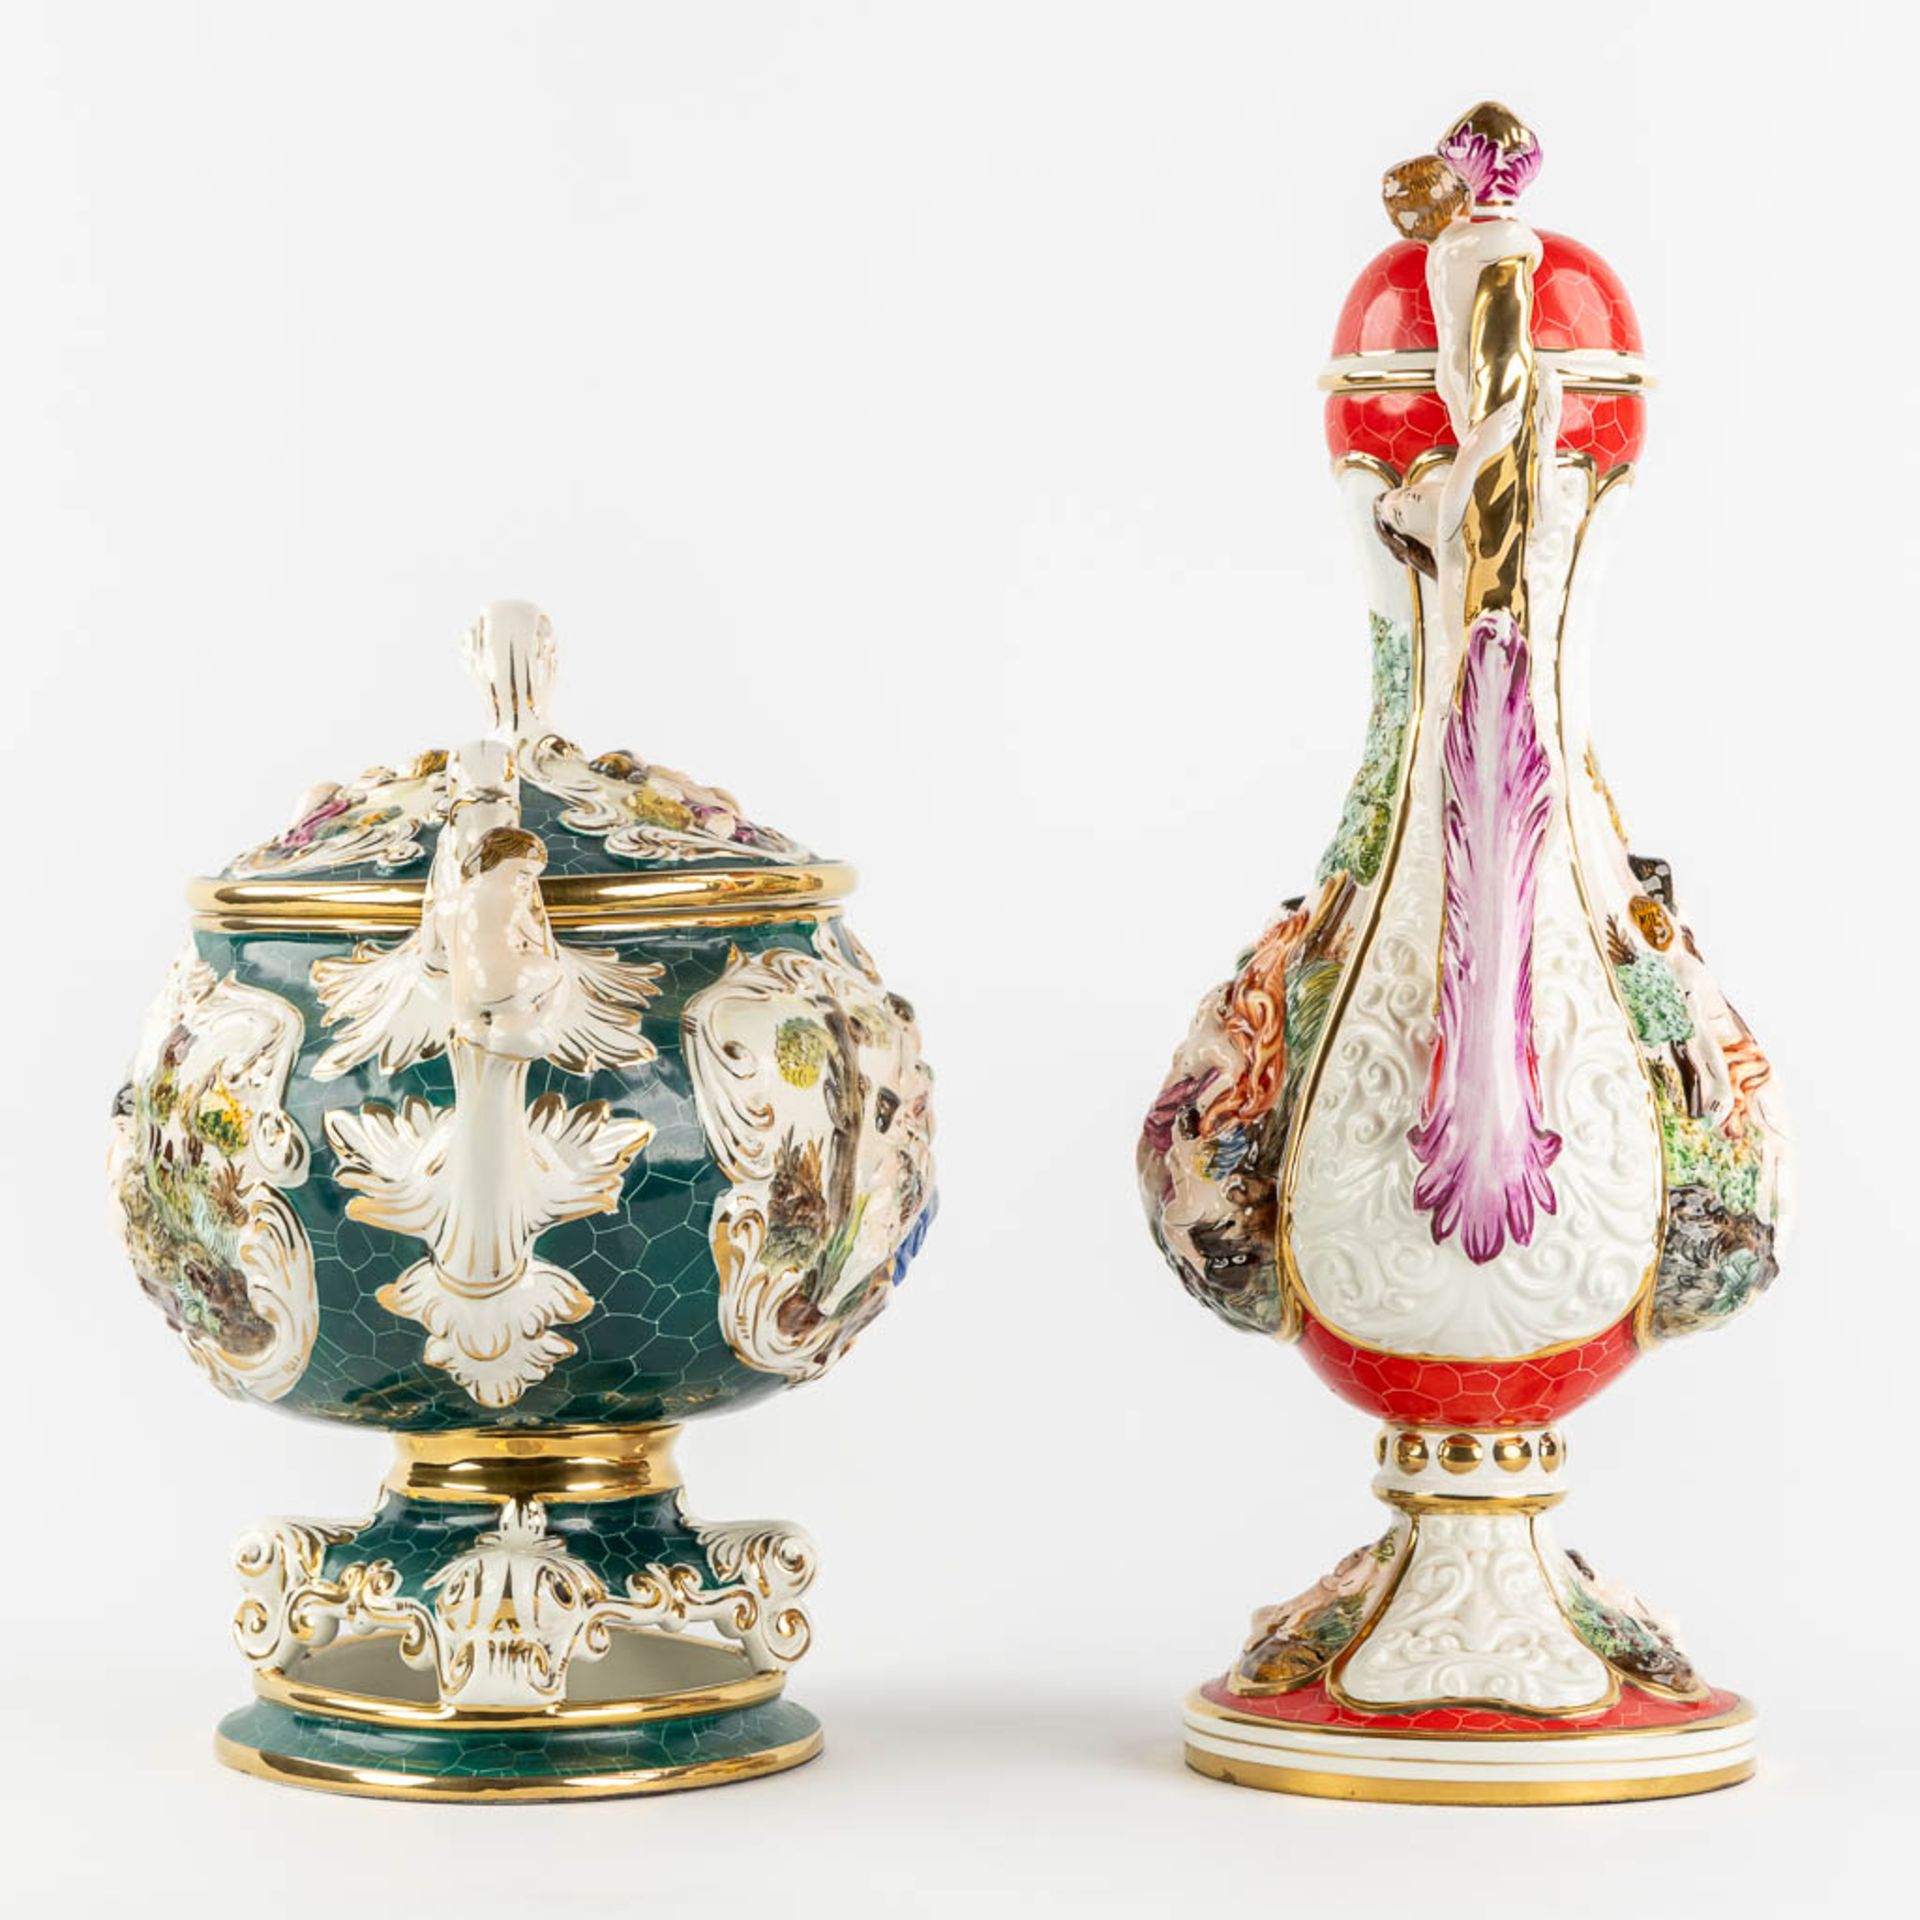 Two vases and a plate, glazed faience, Capodimonte, Italy. (L:21 x W:30 x H:54 cm) - Bild 6 aus 28